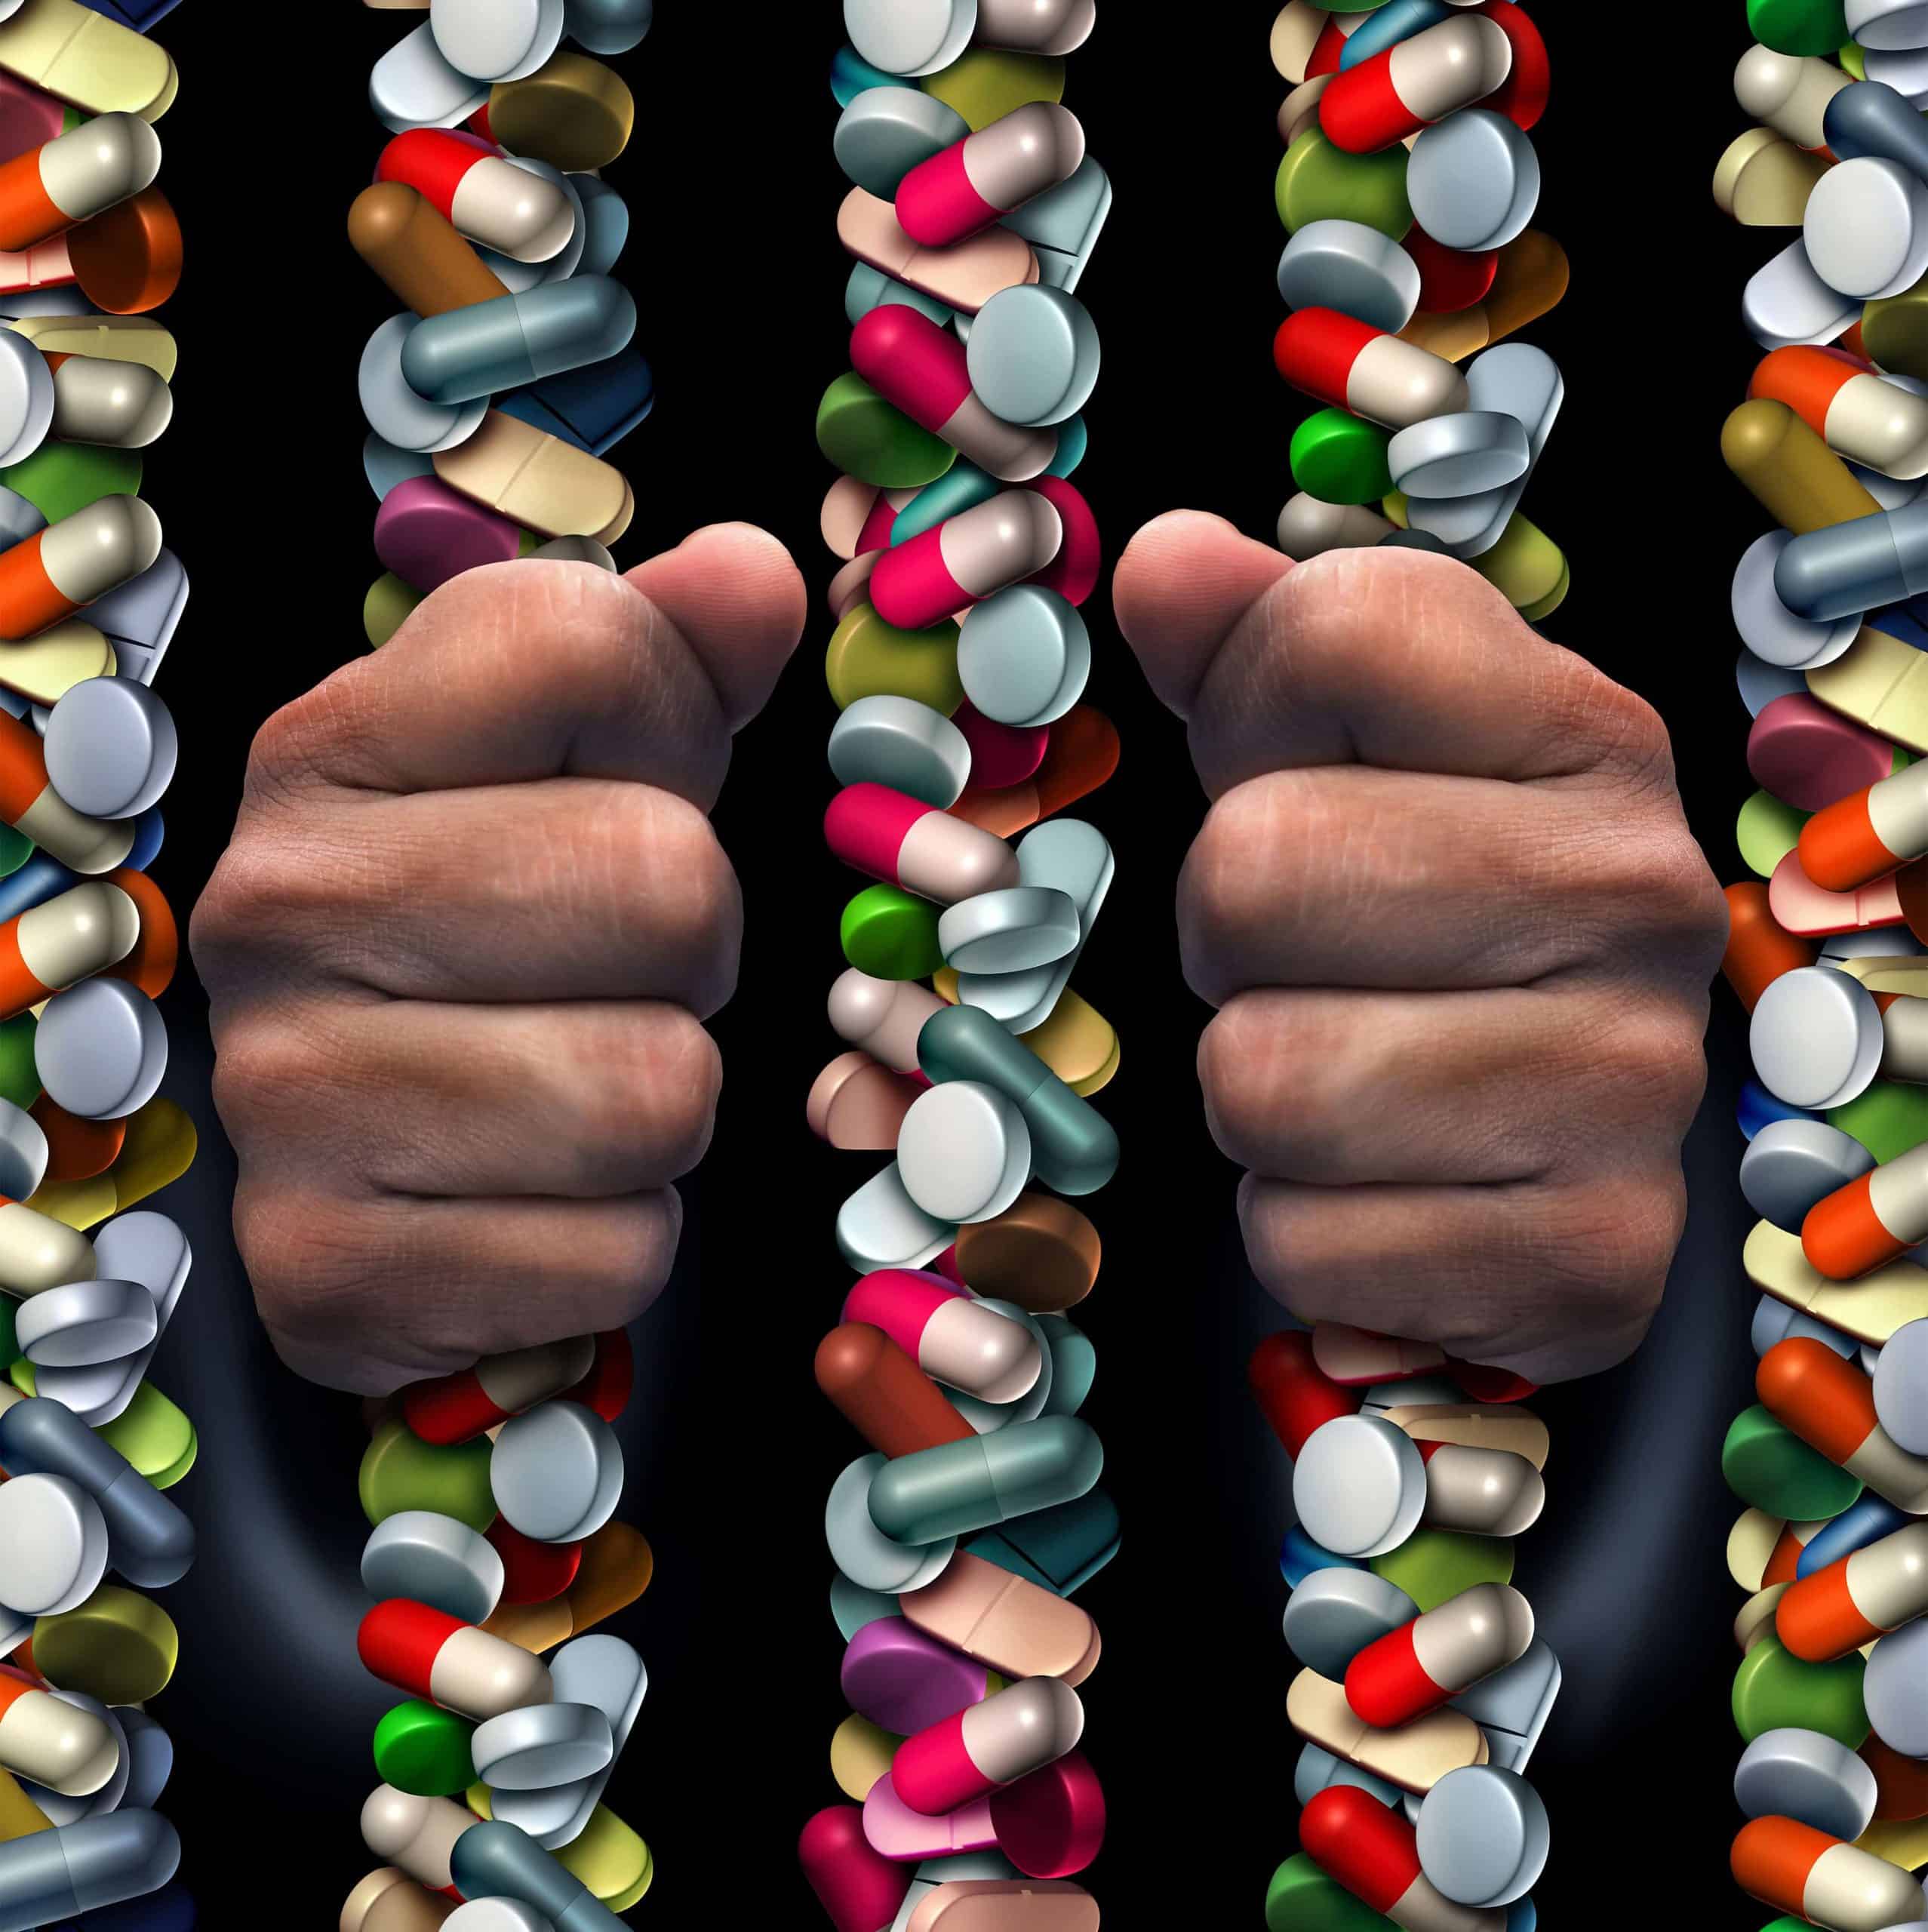 Rpa Use Cases In Healthcare: What Drugs Are Used To Treat Drug Addiction